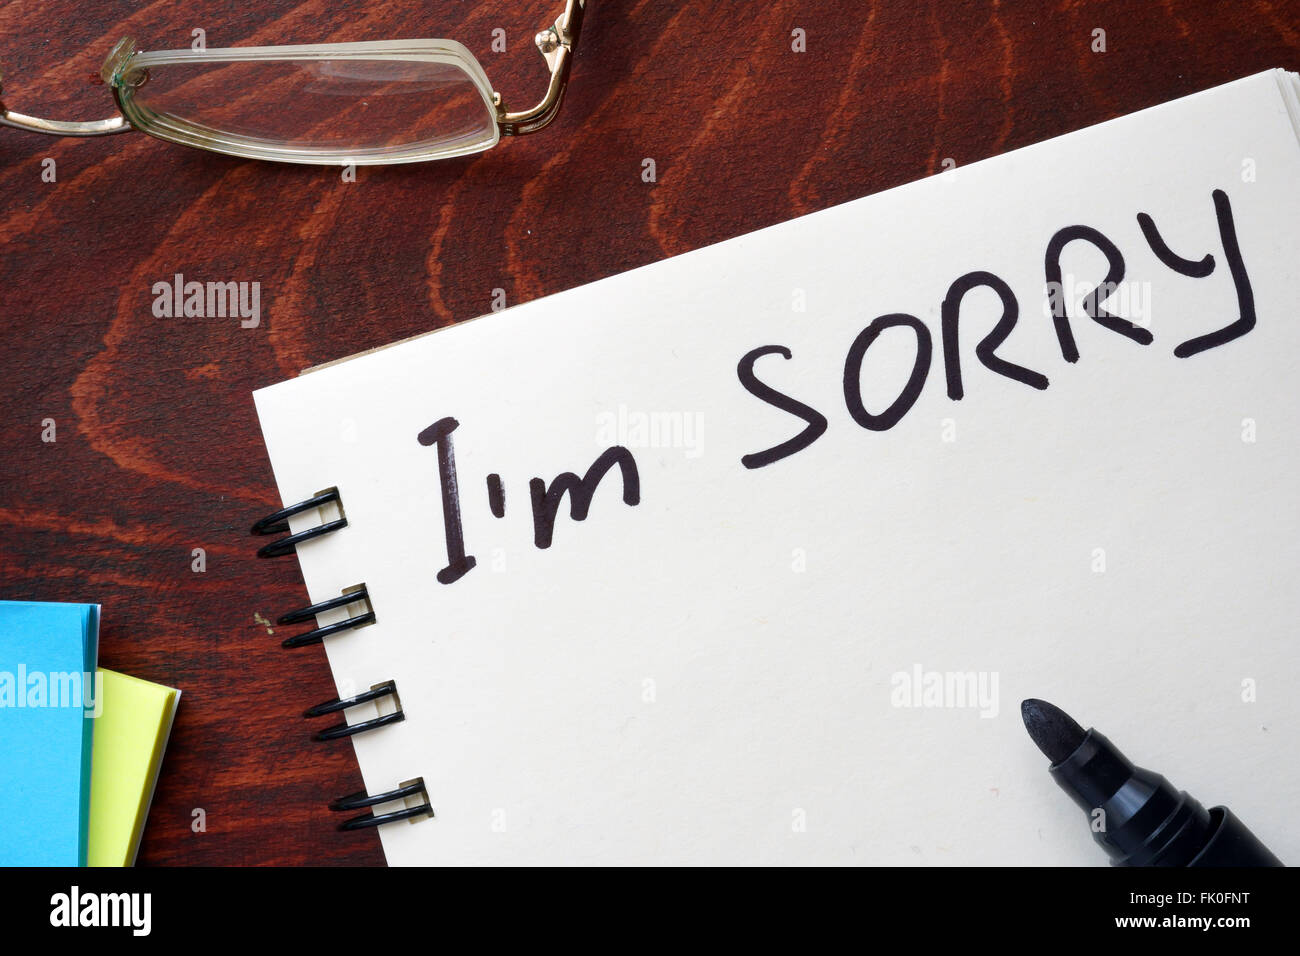 I am sorry written on notepad on a table. Stock Photo